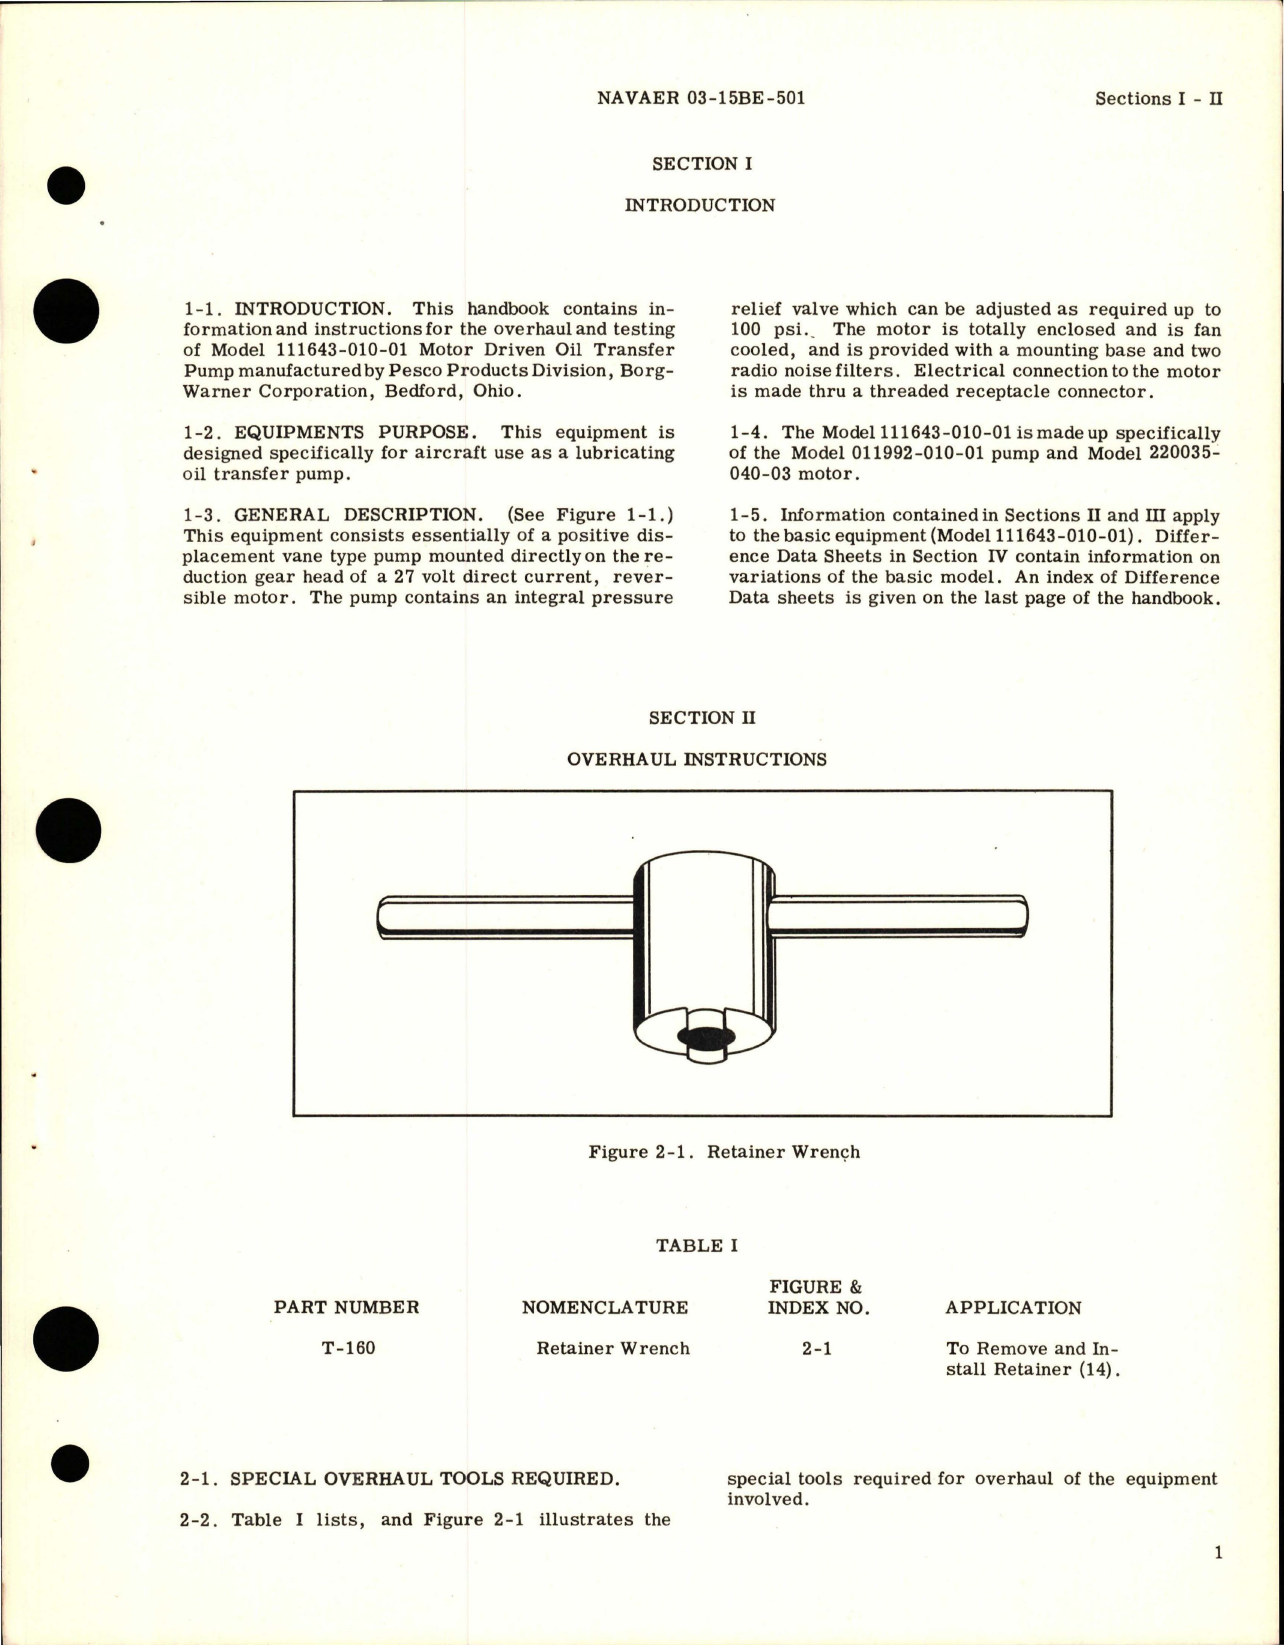 Sample page 5 from AirCorps Library document: Overhaul Instructions for Electric Motor Driven Oil Transfer Pump - 111643 Series